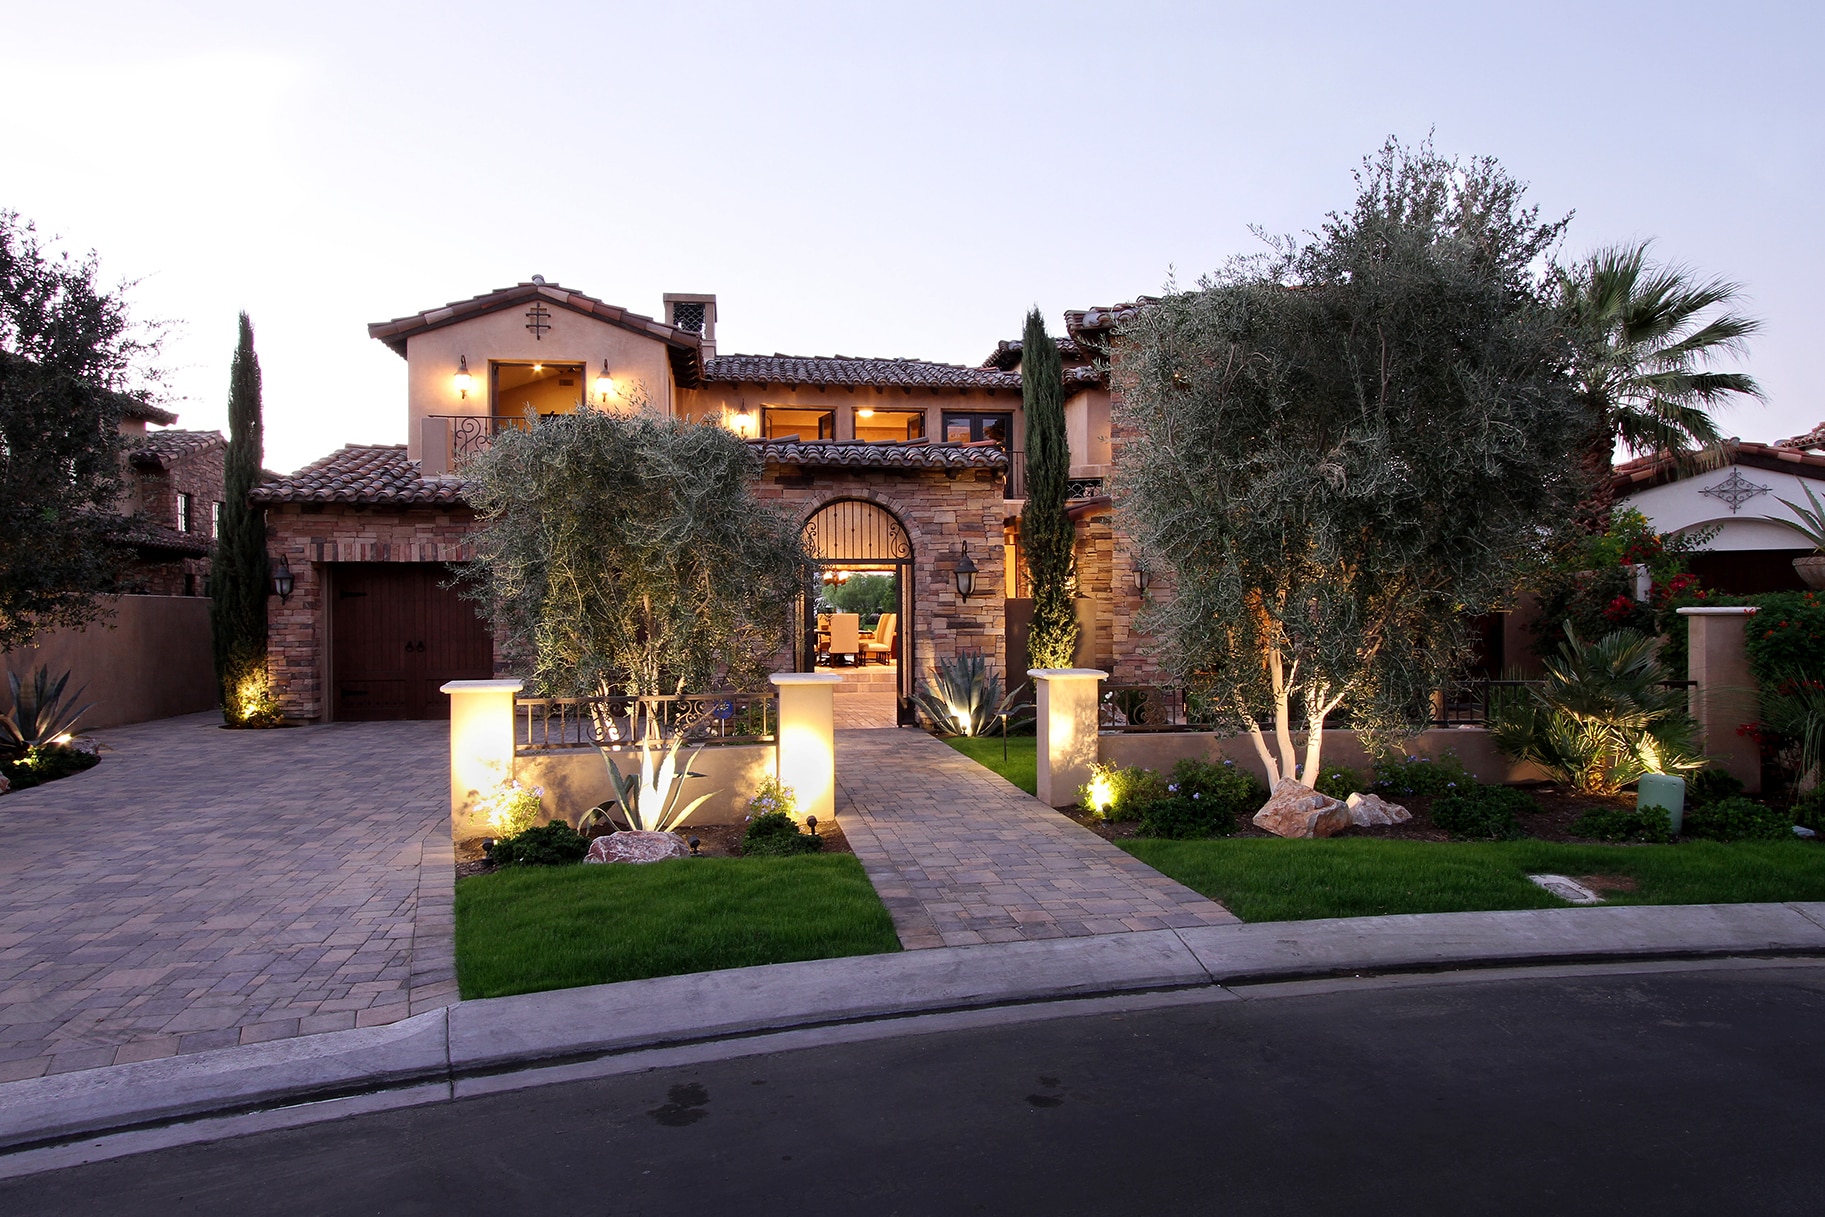 An exterior shot of Kyle Richard's Palm Springs home on The Real Housewives Of Beverly Hills Season 6